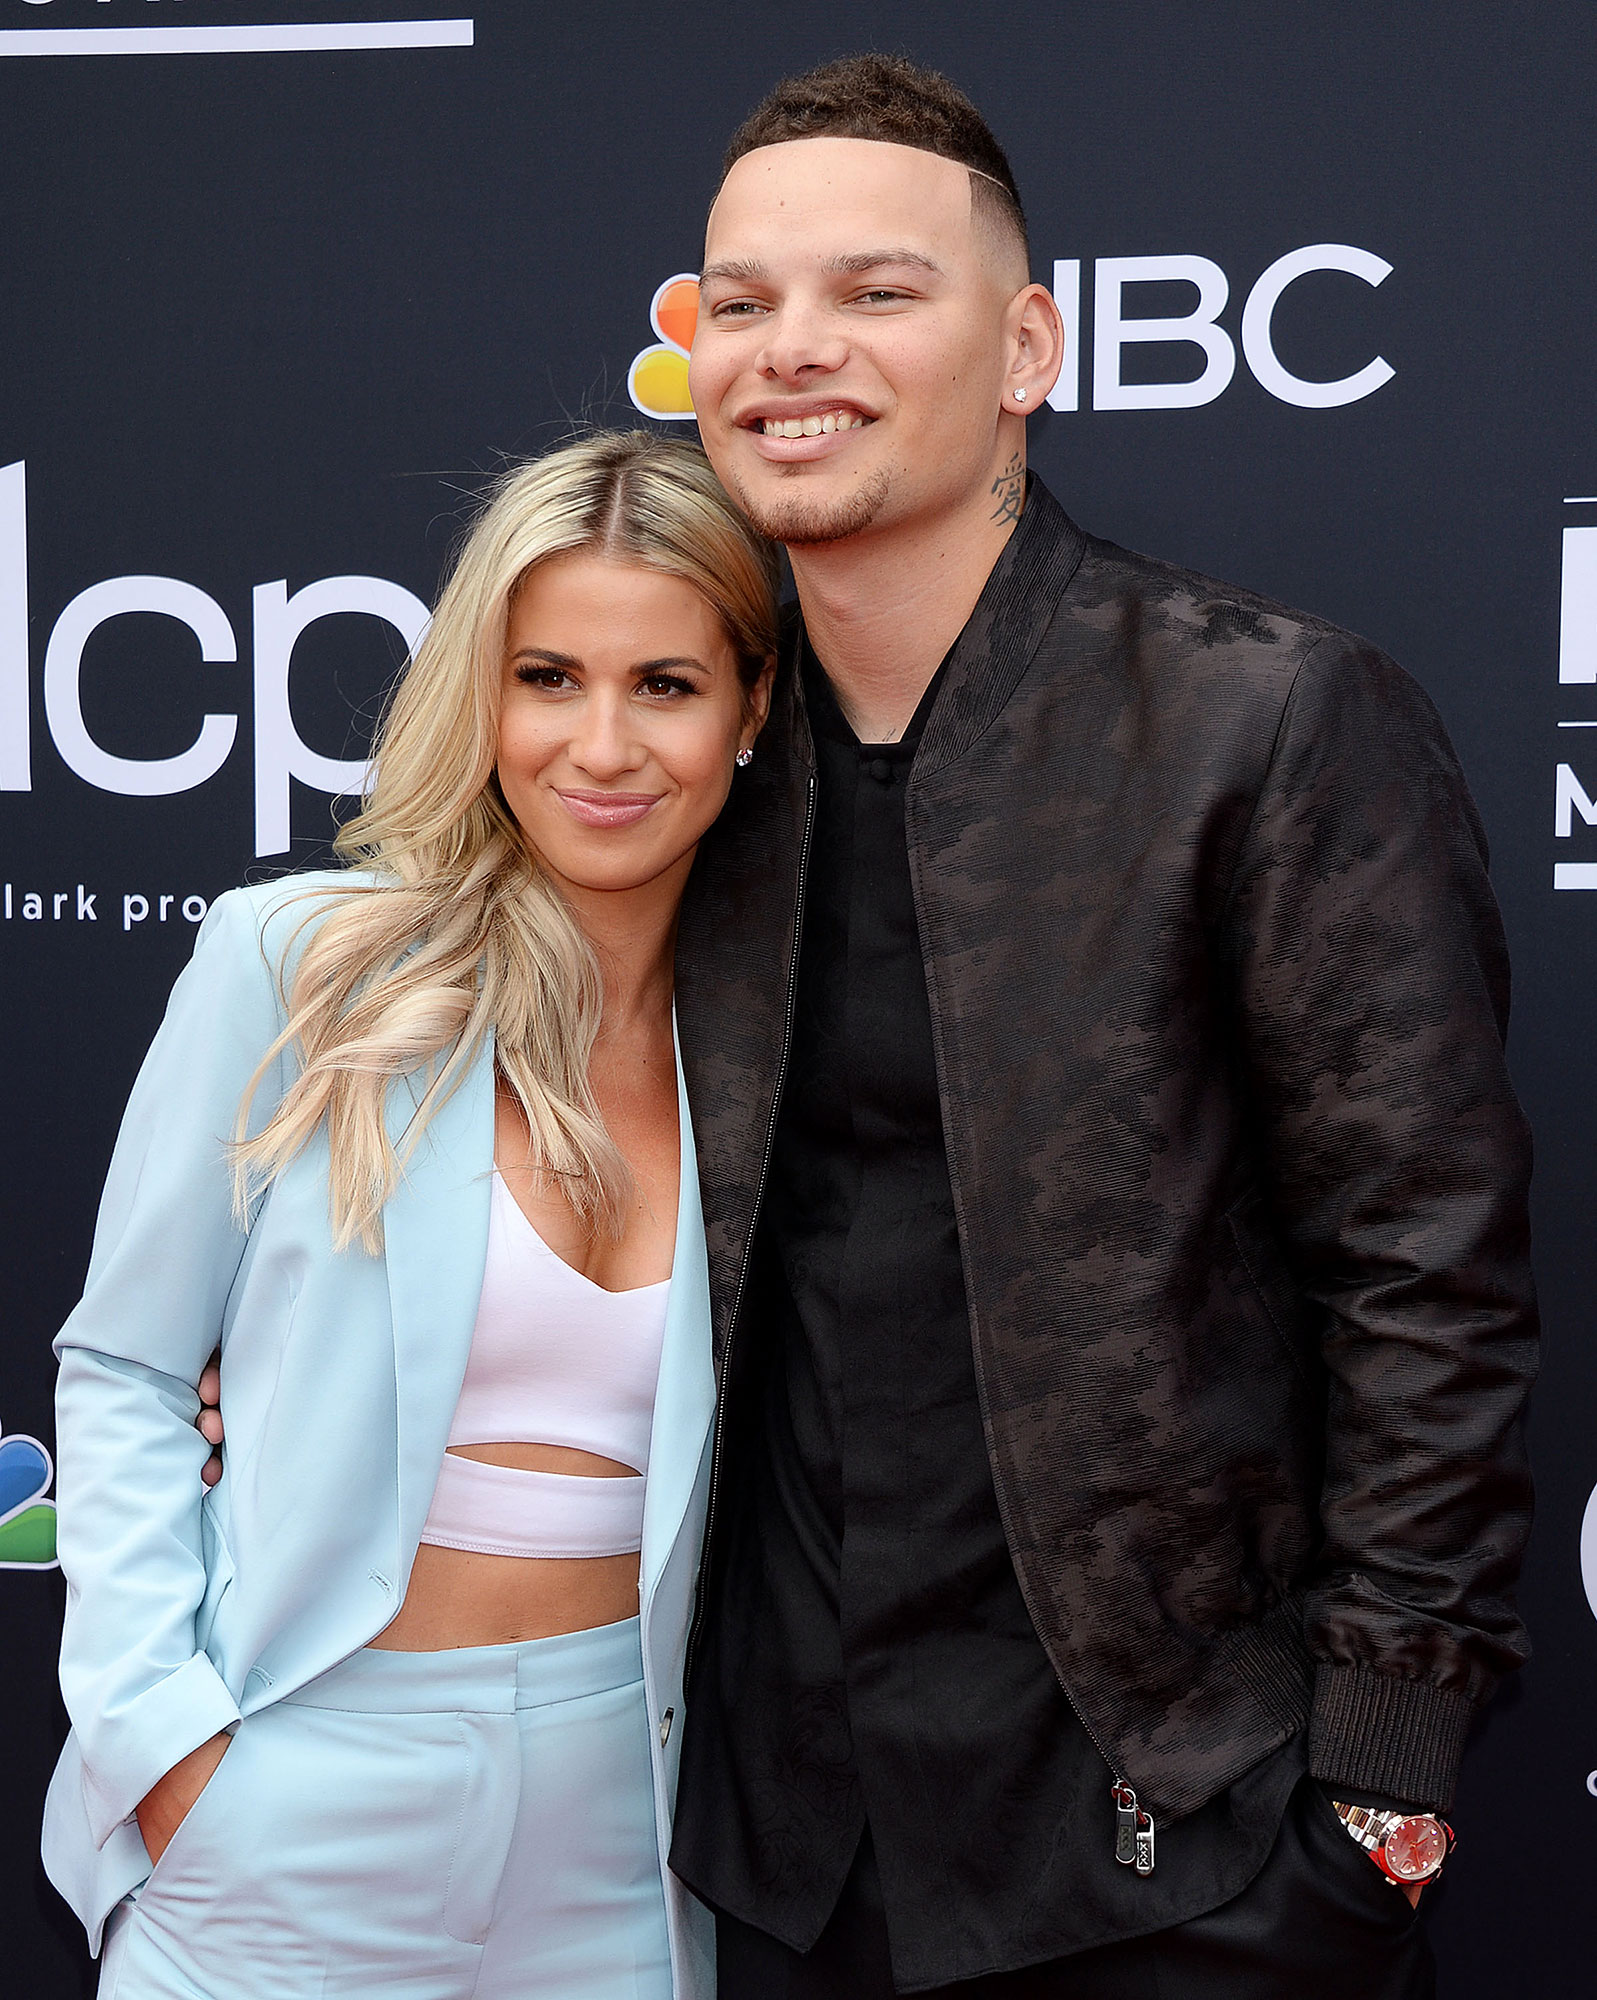 Kane Brown’s Wife Katelyn Jae Gives Birth to Baby Girl